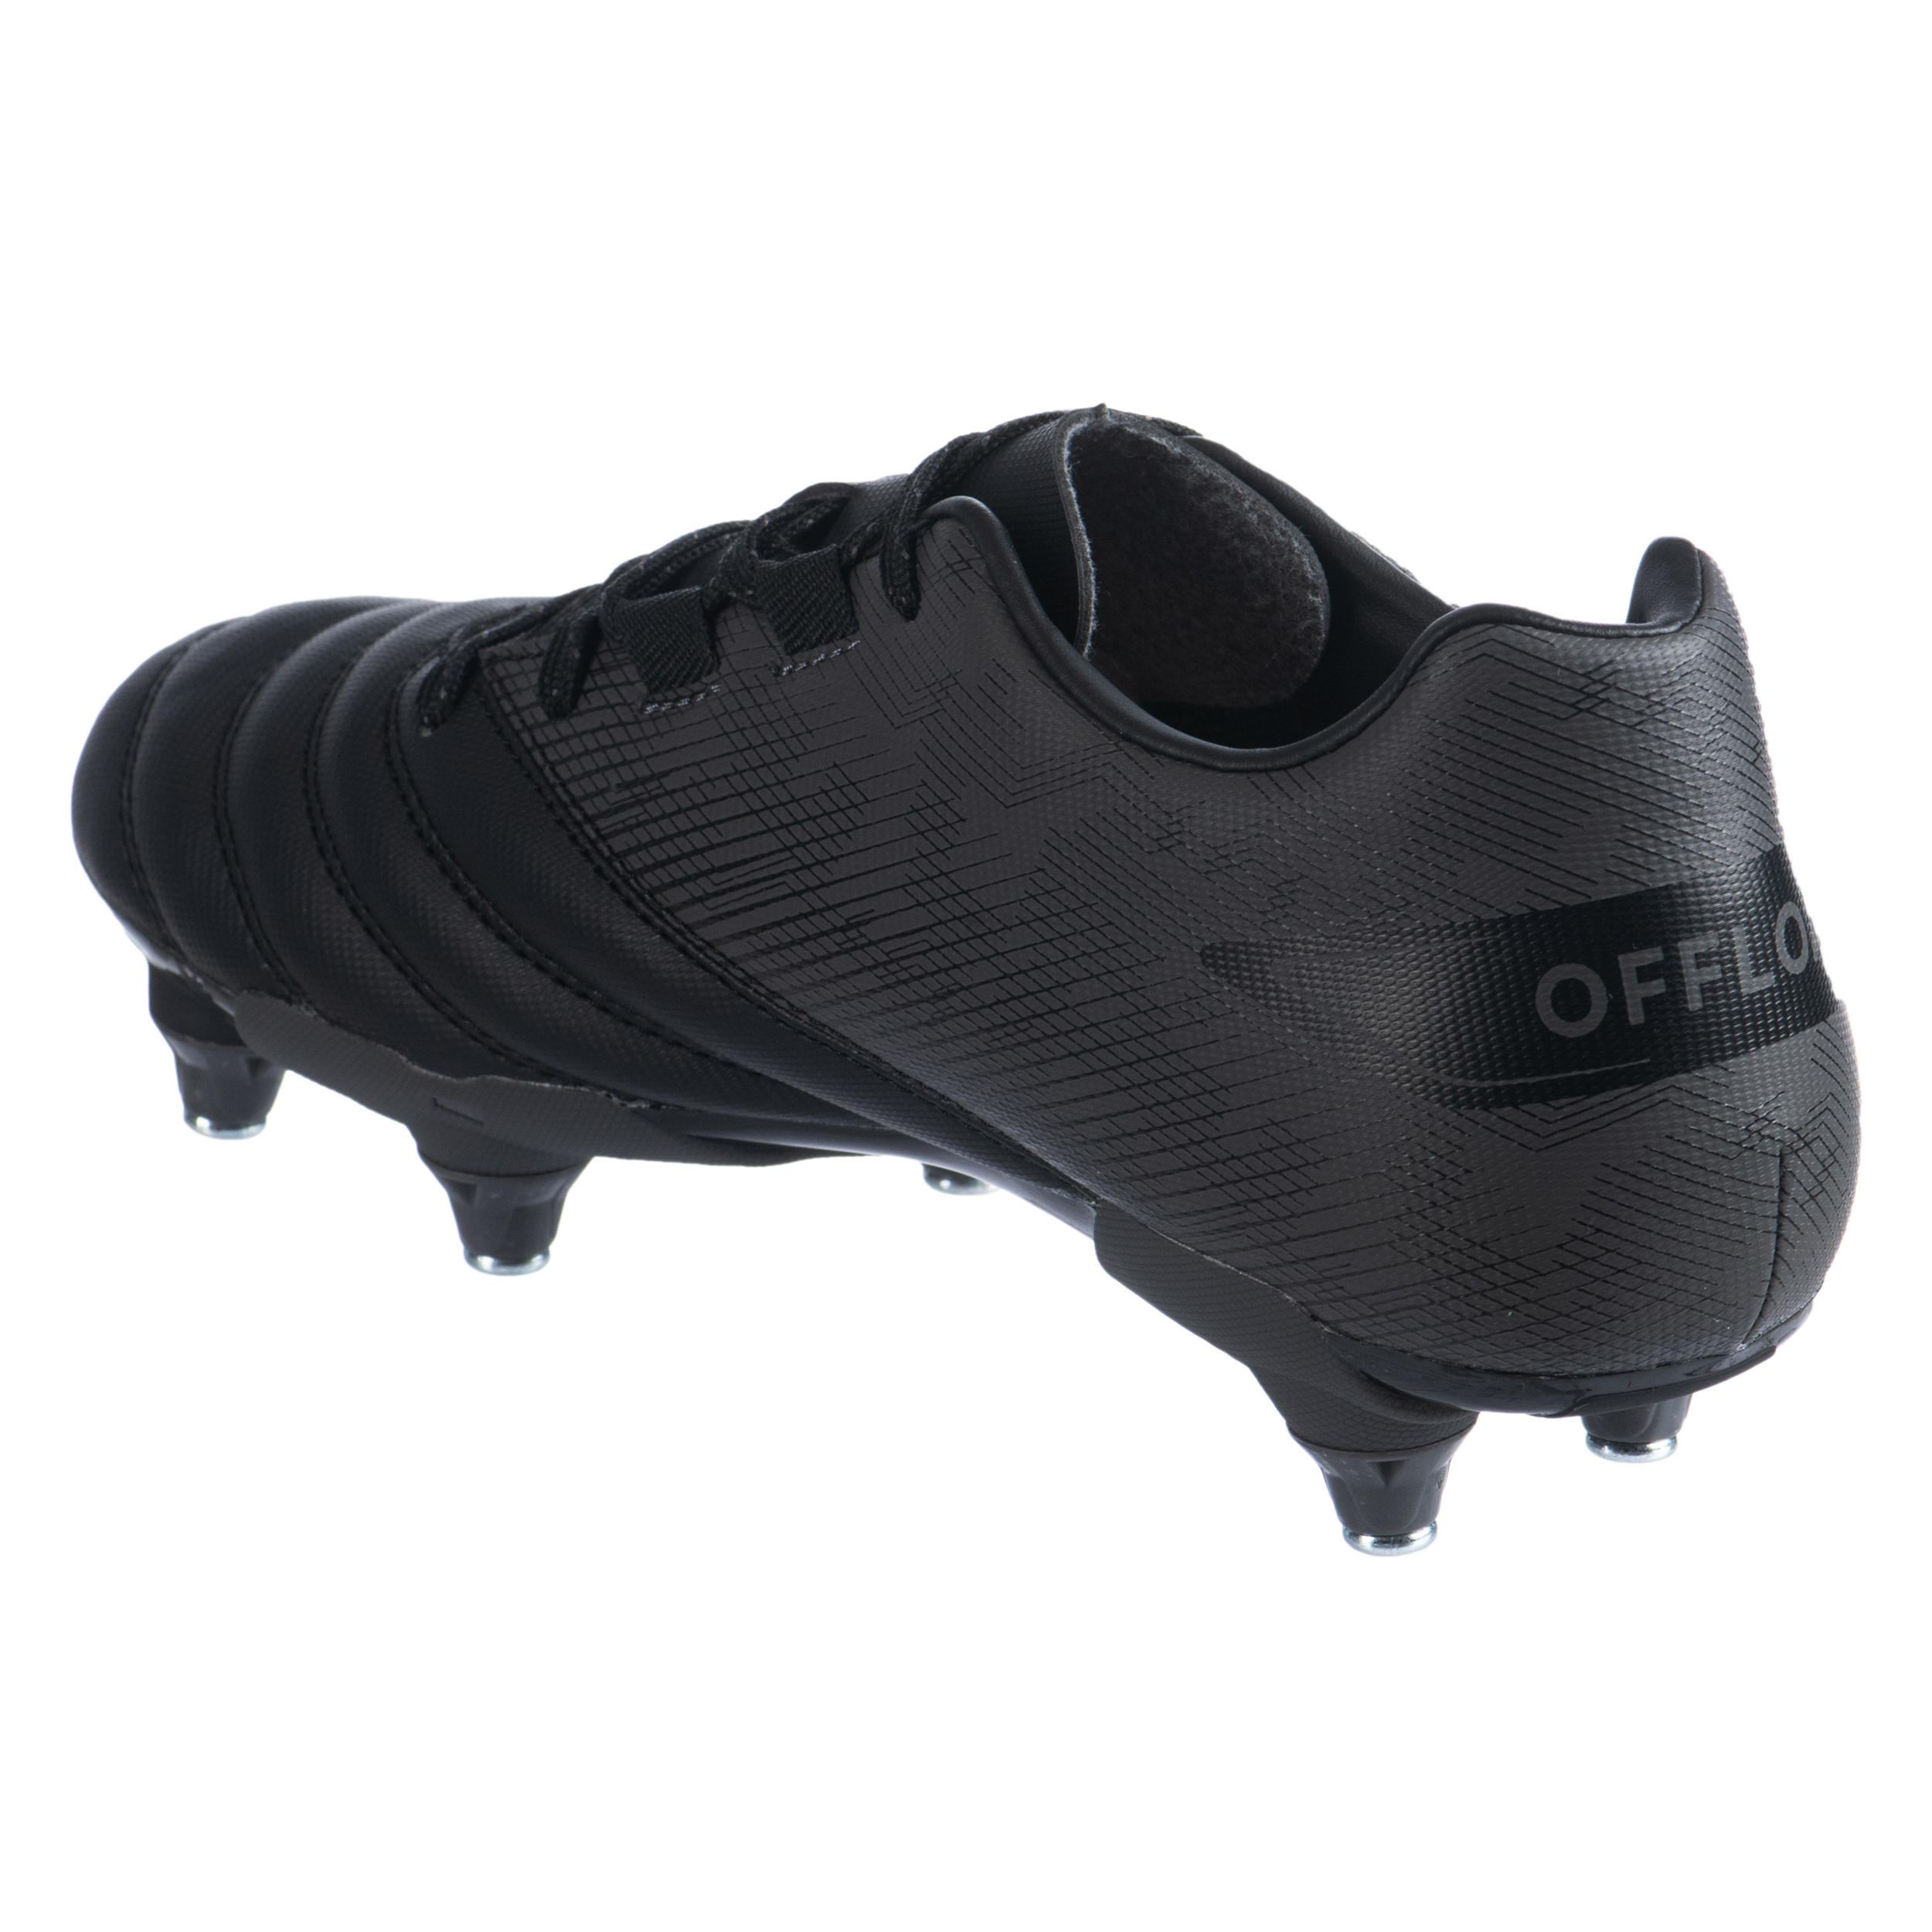 Kids' Soft Ground Studded Rugby Boots R500 SG - Black 2/7